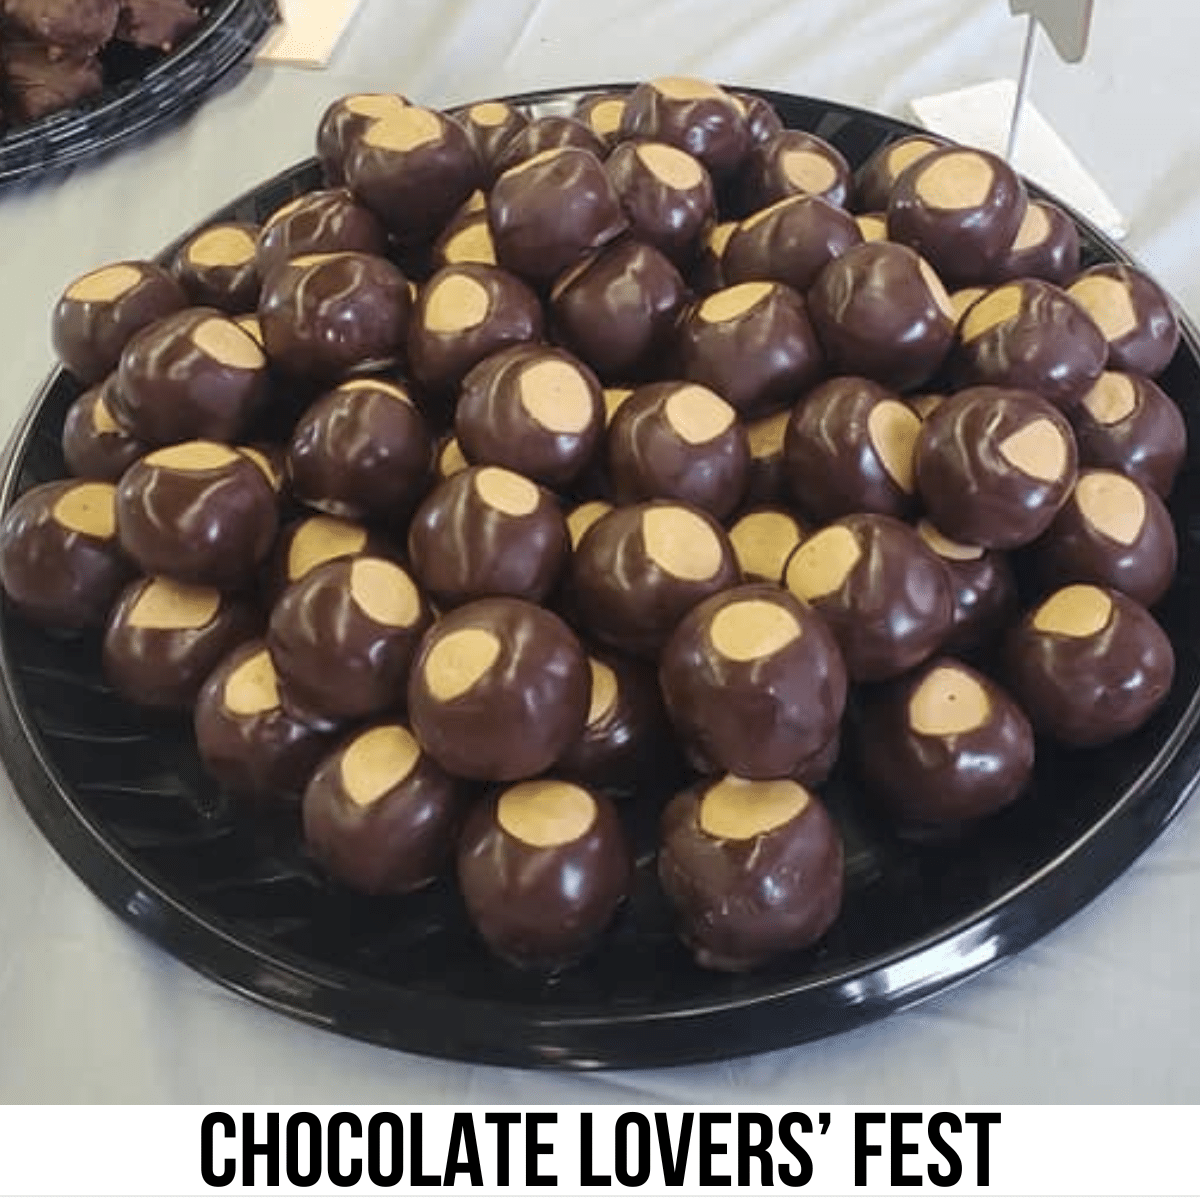 A square image with a photo of a platter of buckeye candies. A white strip across the bottom says Chocolate Lovers' Fest.